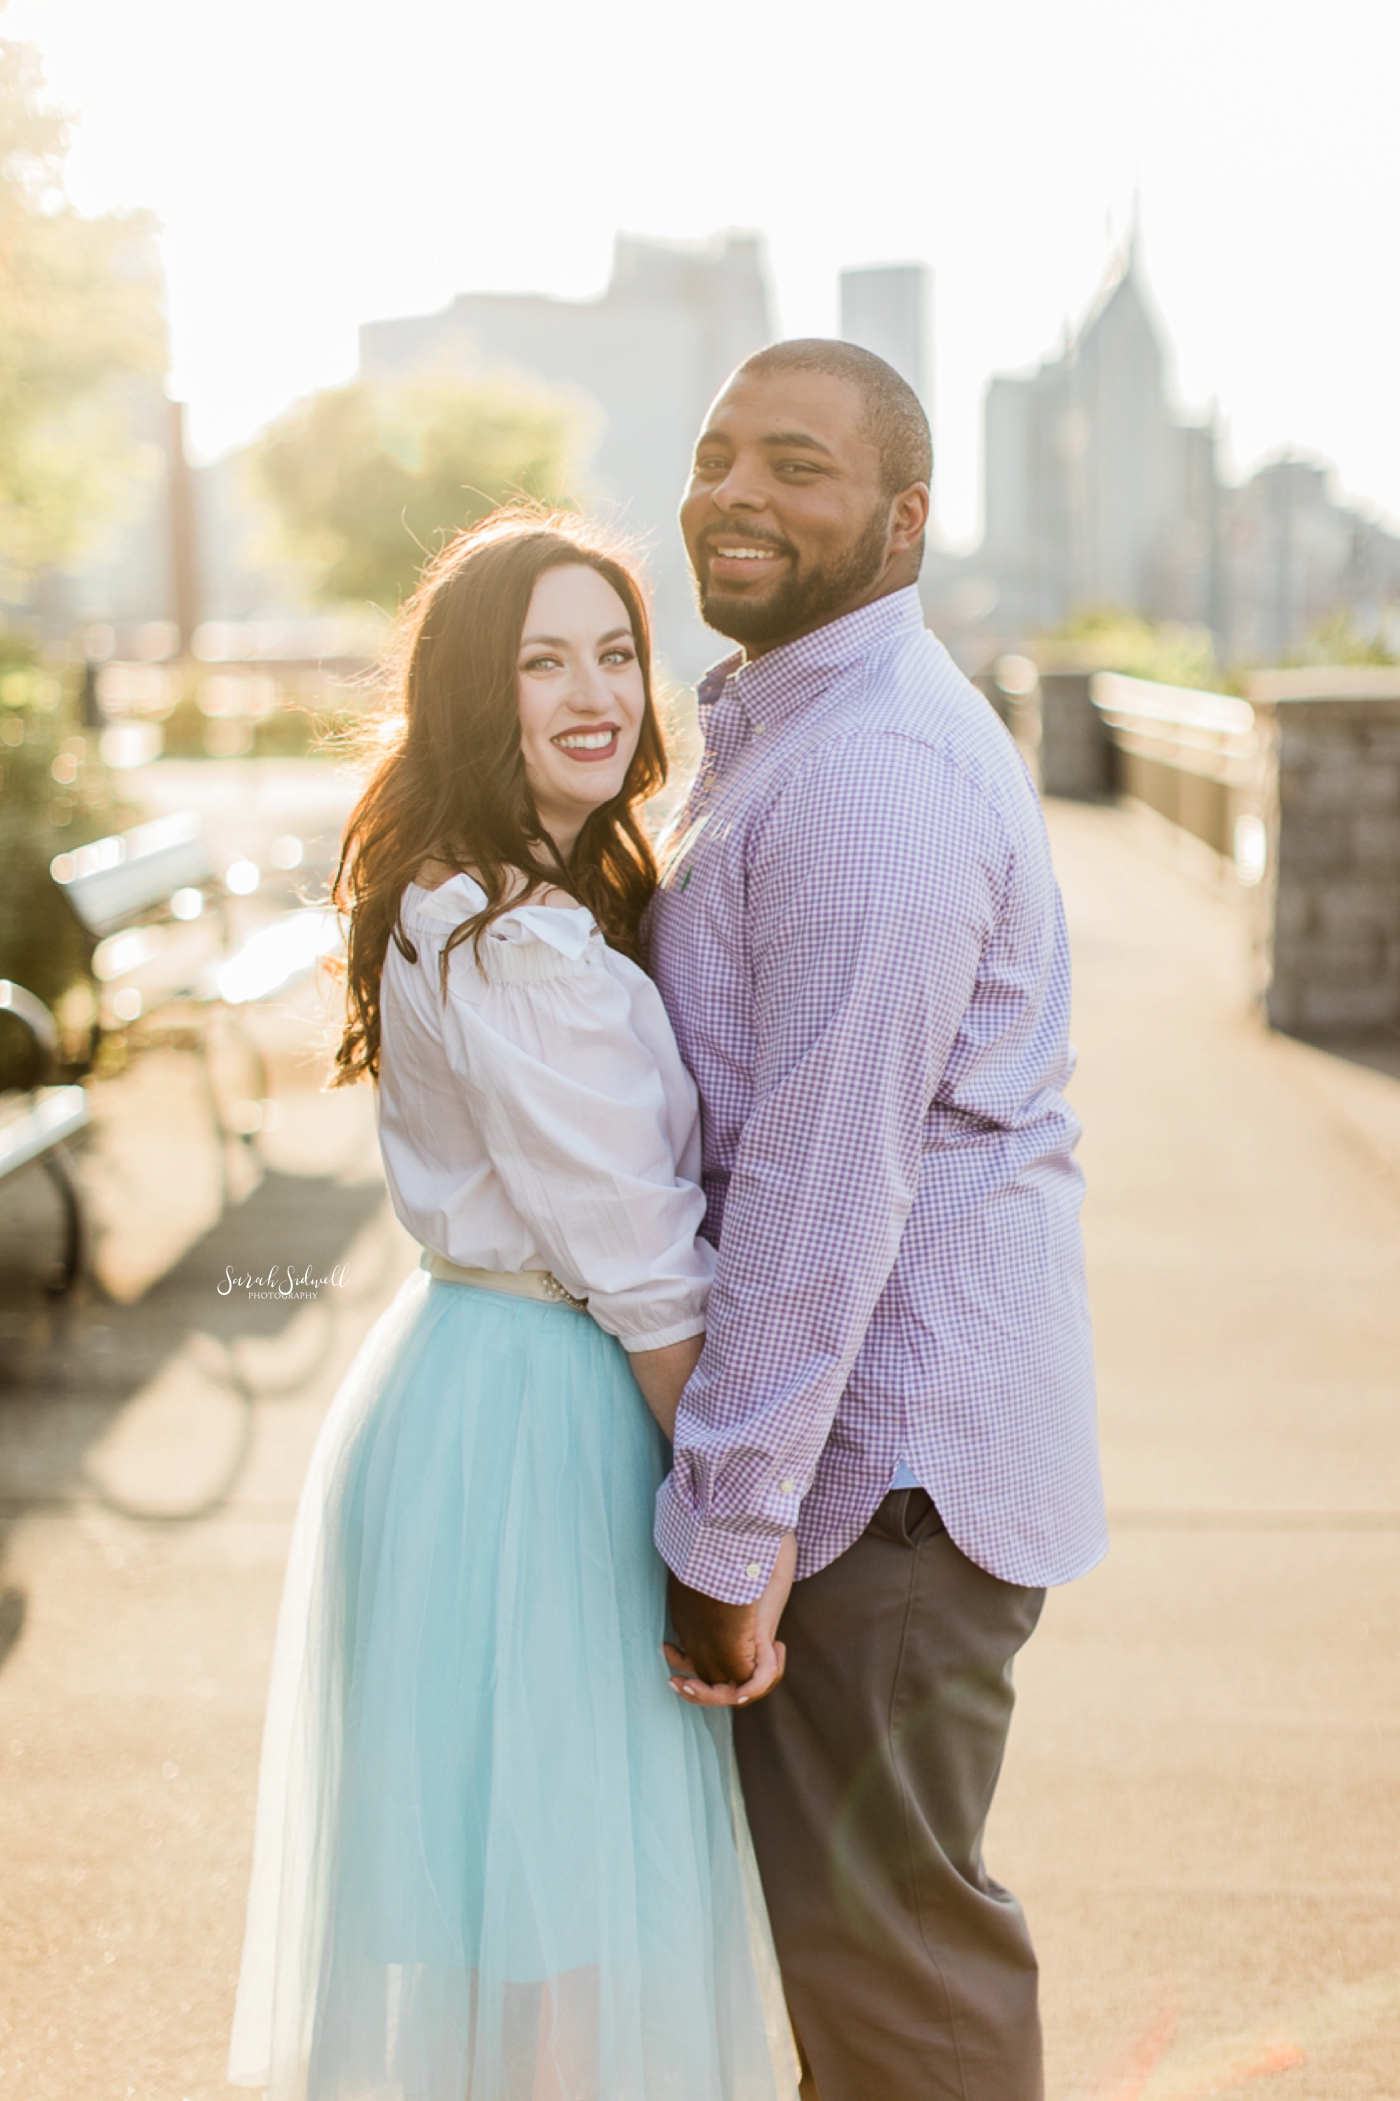 Engagement Photography | Sarah Sidwell Photography